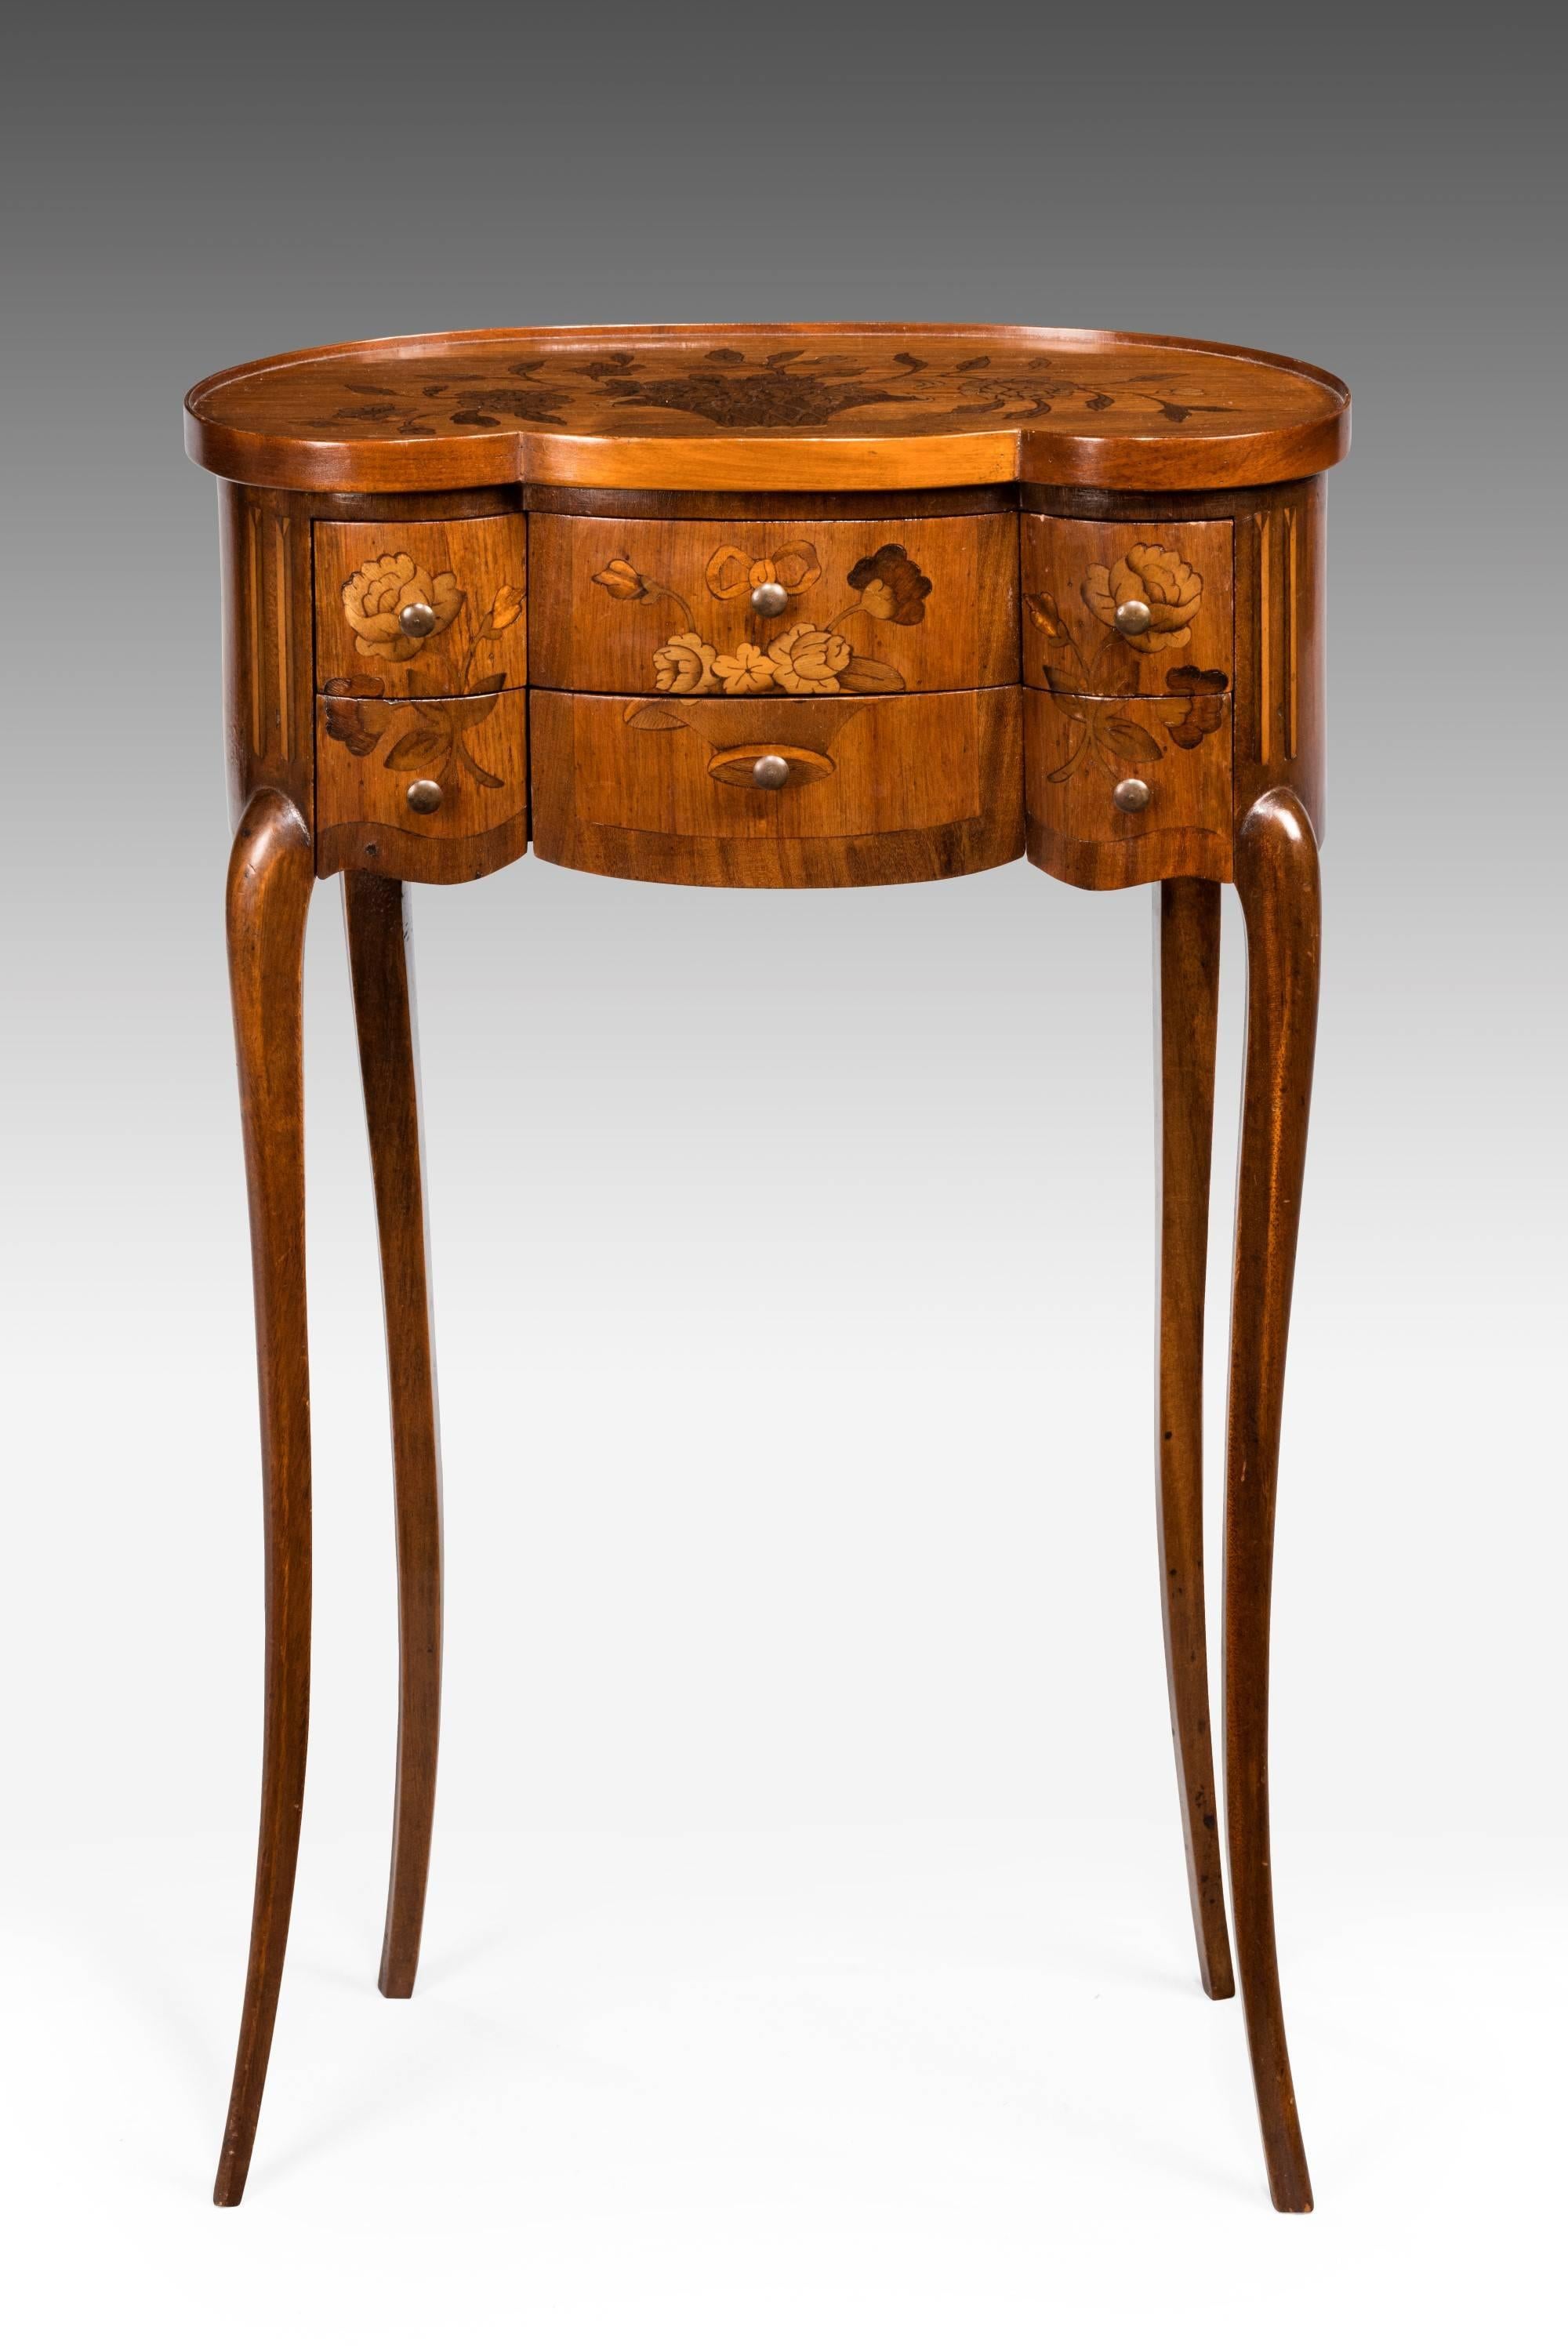 Late 19th century Continental marquetry commode. The top and front inlaid with flowers. On very slender supports. Triple serpentine front with a well shaped top. Very fine slender gallery.